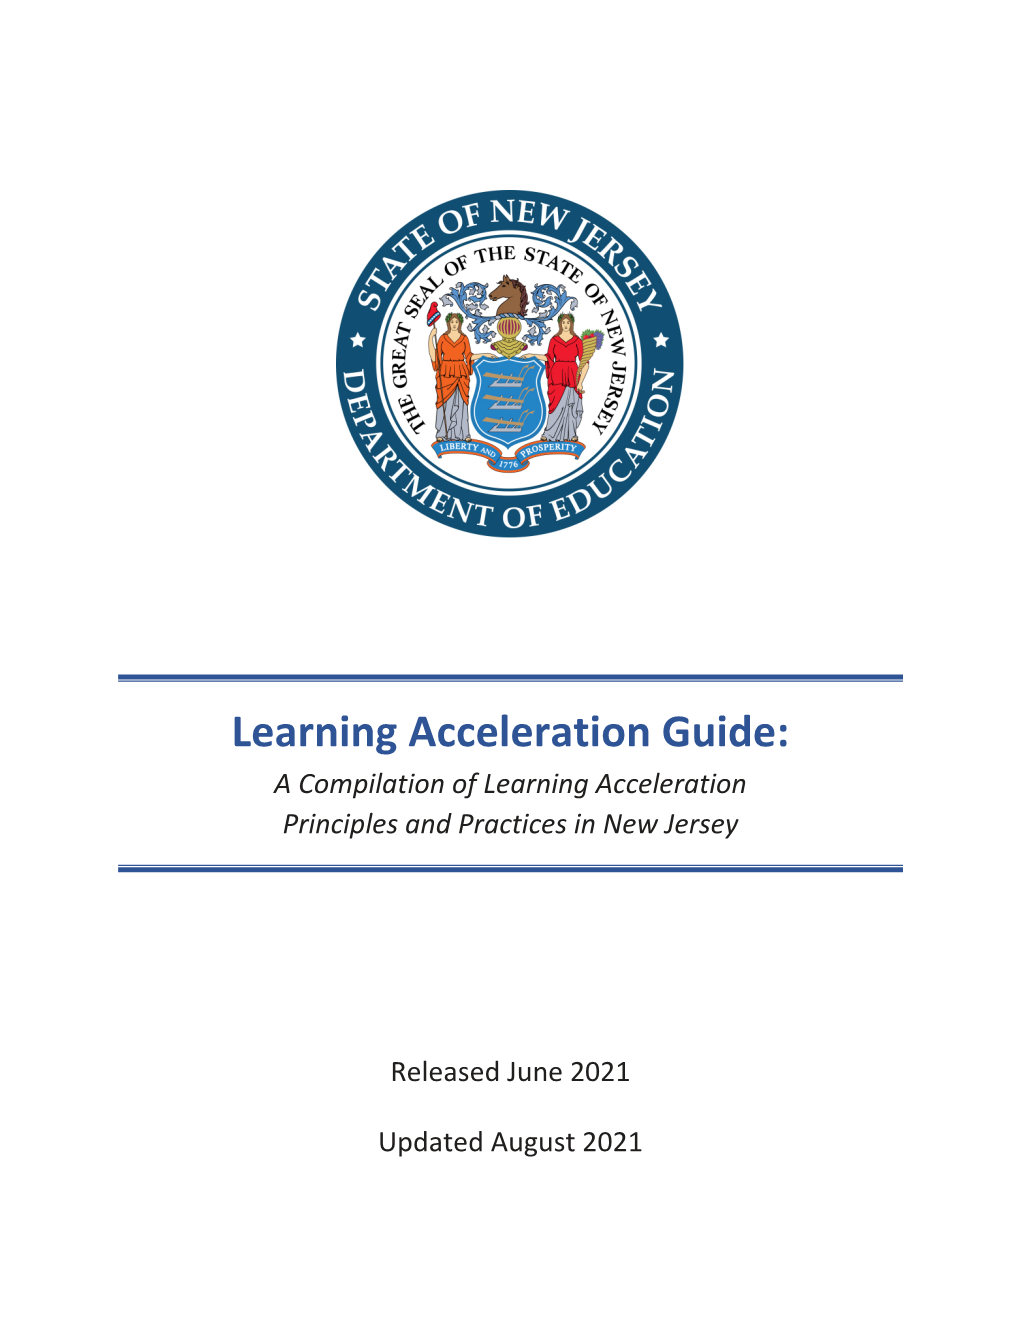 Learning Acceleration Guide: a Compilation of Learning Acceleration Principles and Practices in New Jersey